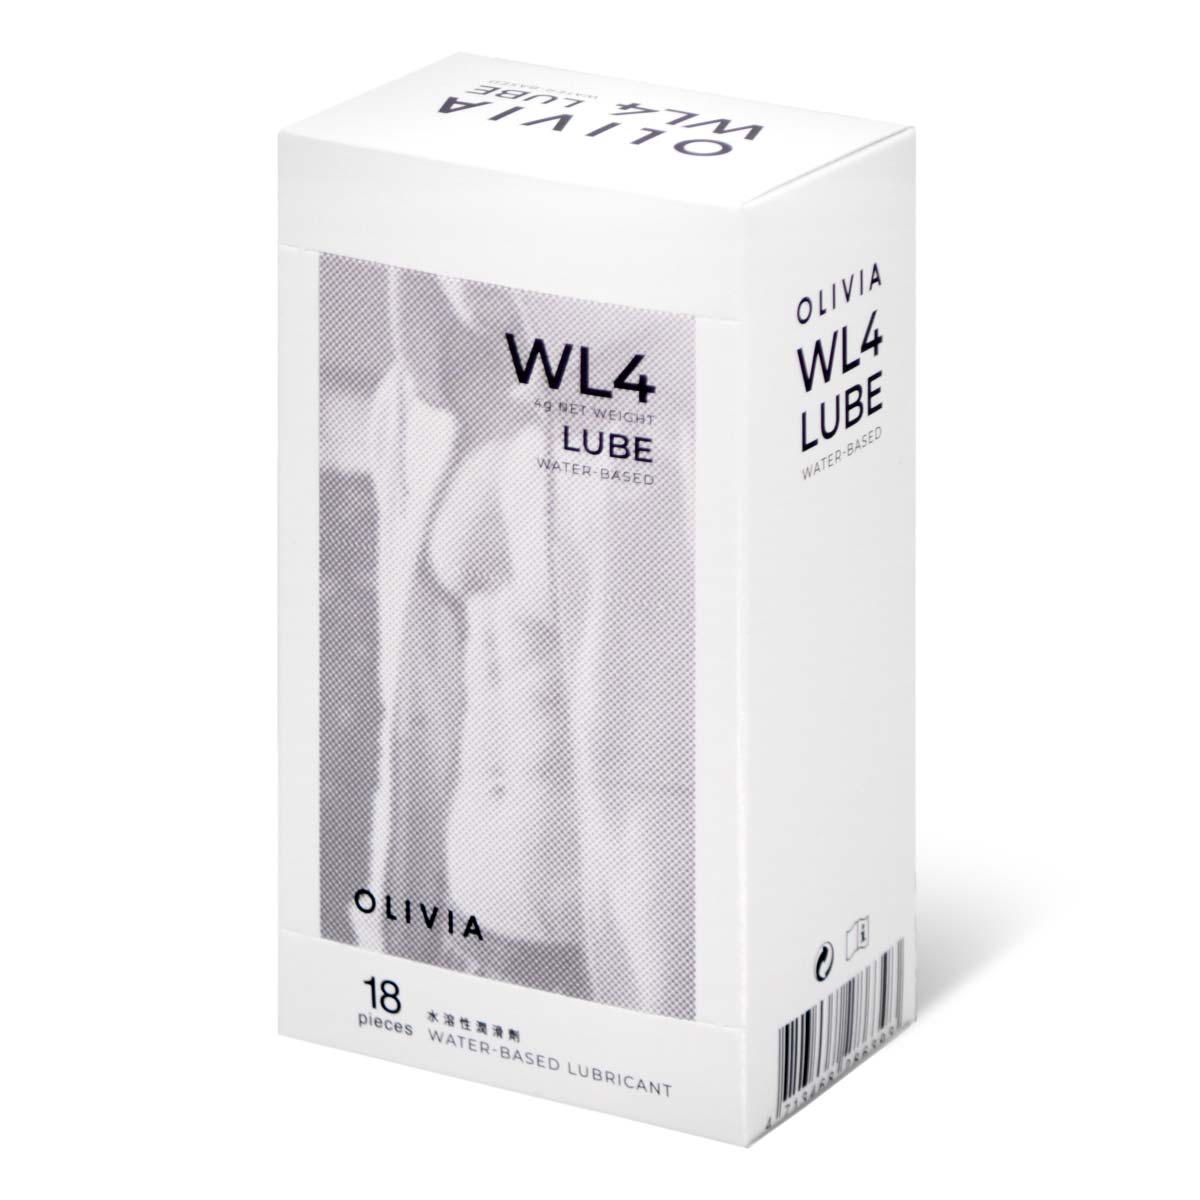 Olivia The Inner Man  4g (sachet) 18 pieces Water-based Lubricant-p_1